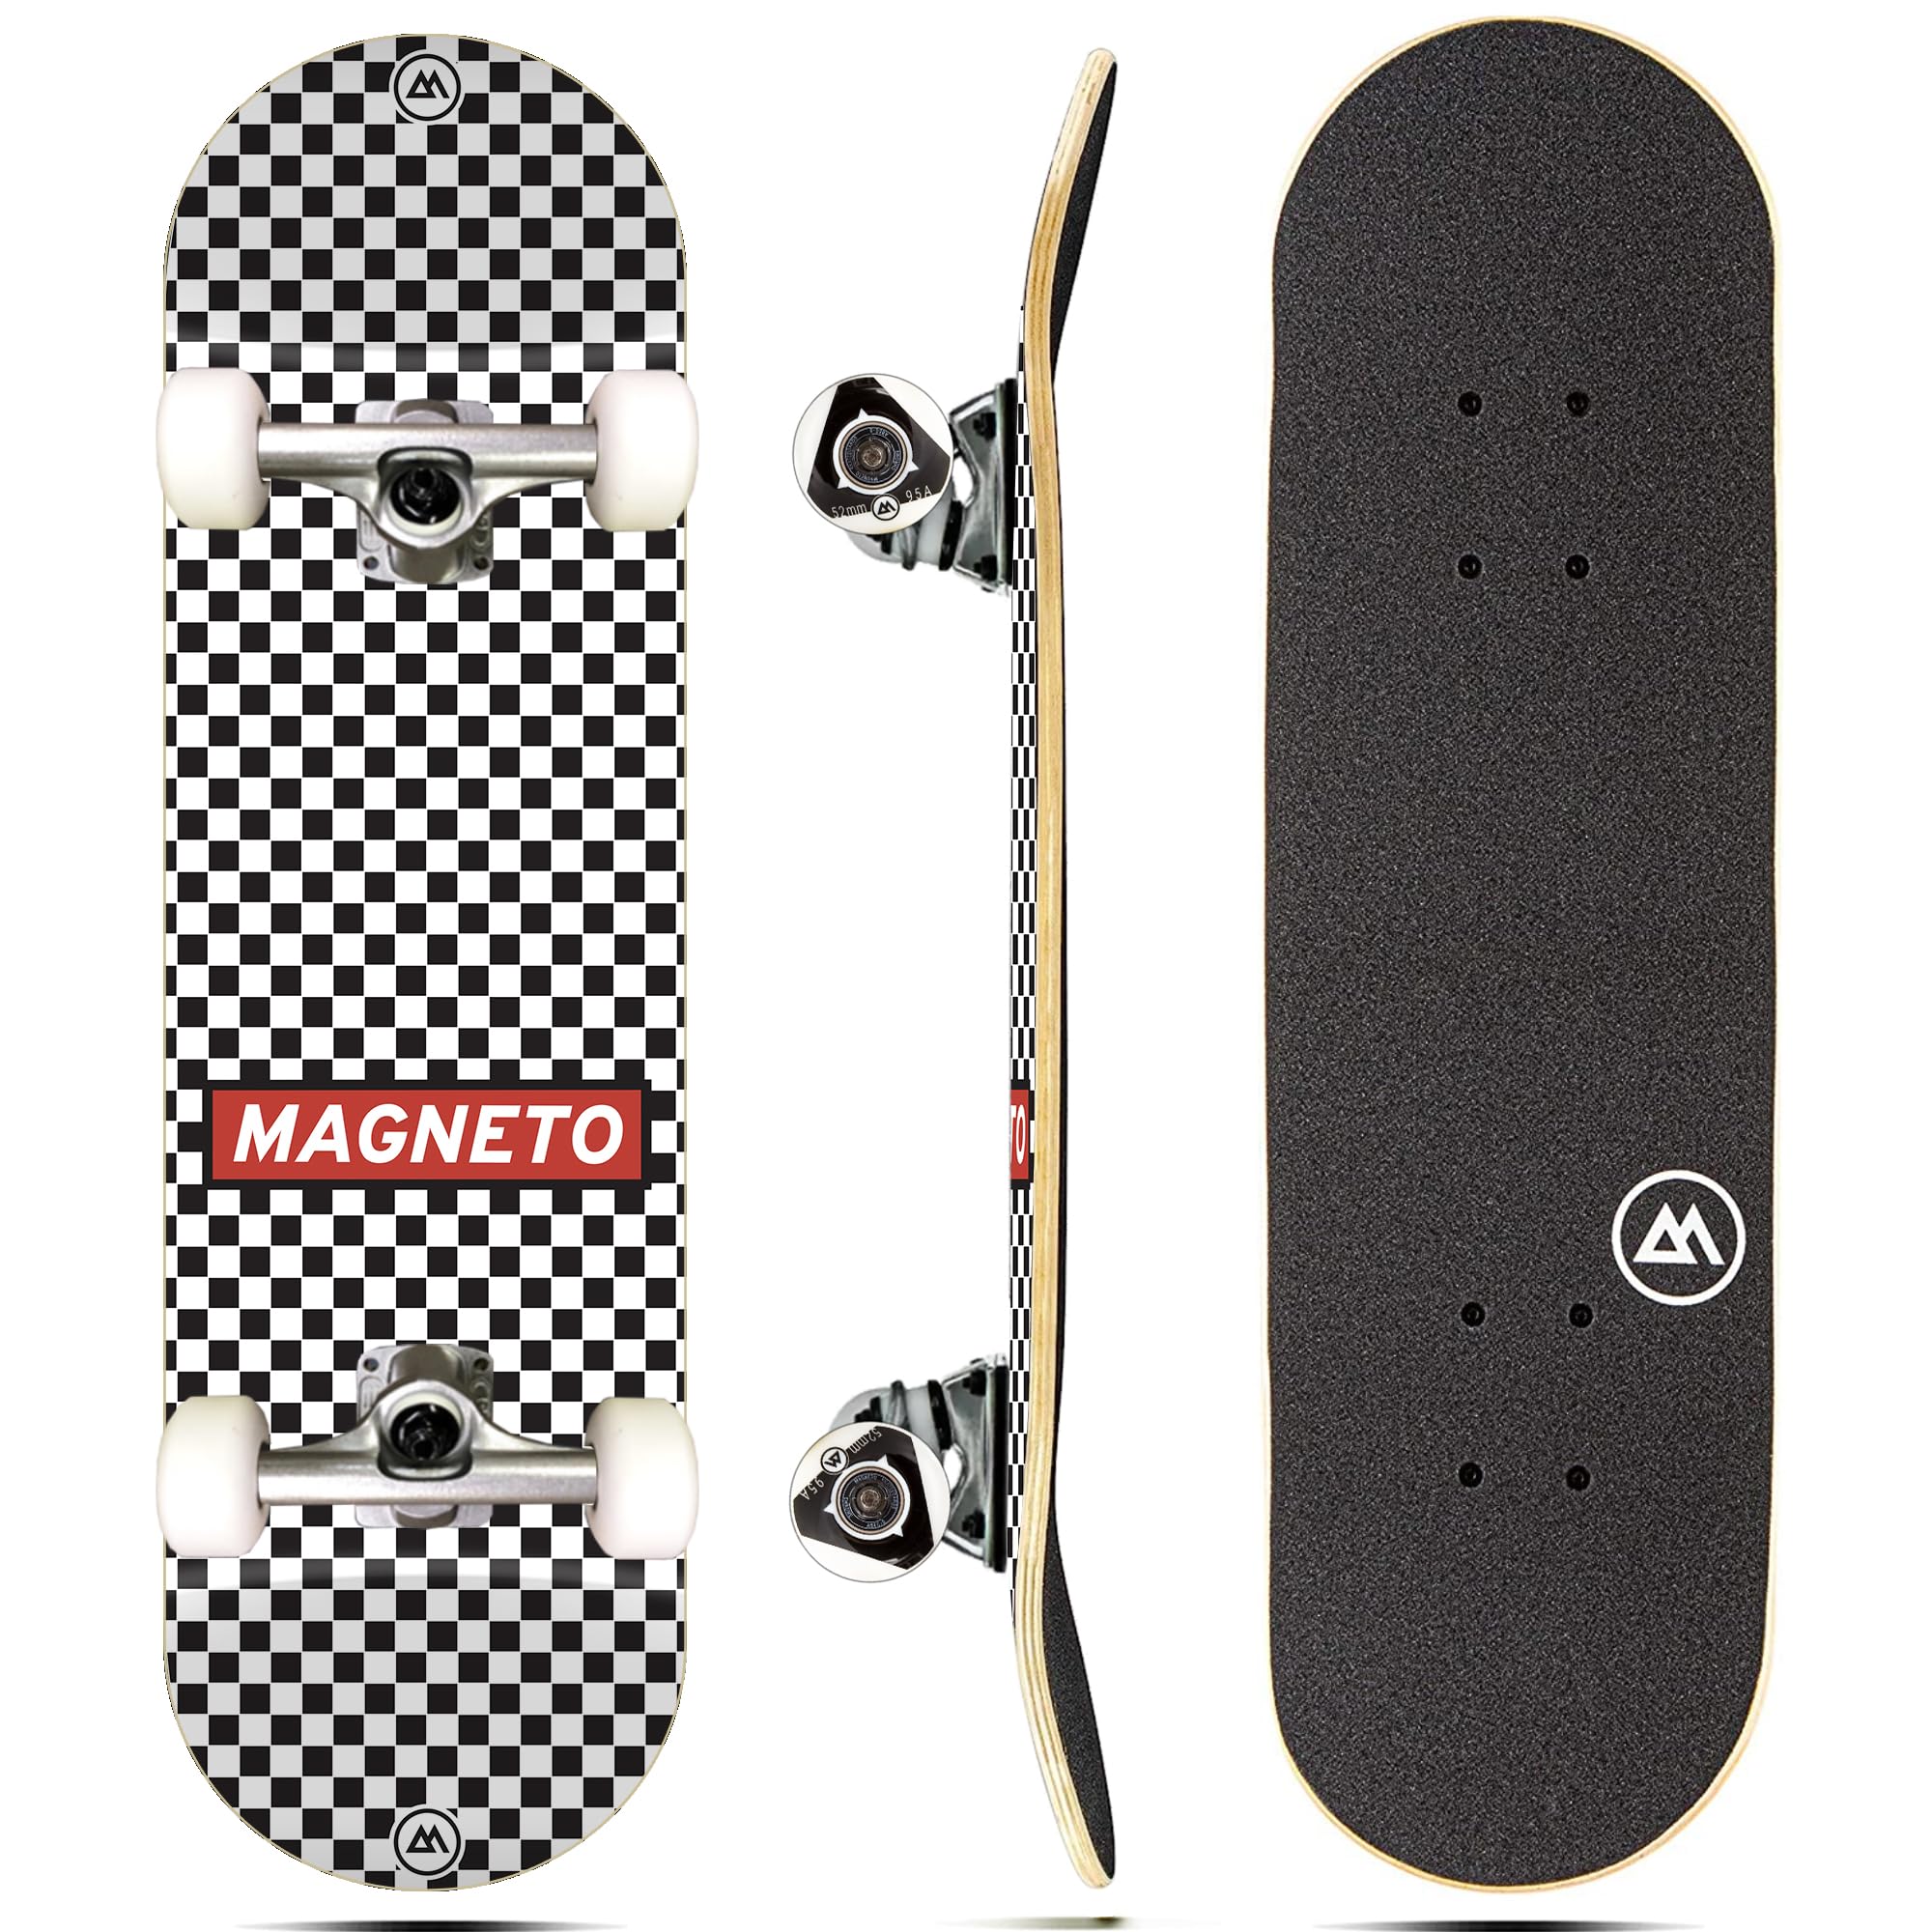 Magneto Complete Skateboard | 9-Layer Maple Wood | ABEC 5 Bearings, Smooth Wheels | Double Kick Concave Deck | Kids Skateboard Cruiser Skateboard | Skateboards for Beginners, Teens & Adults